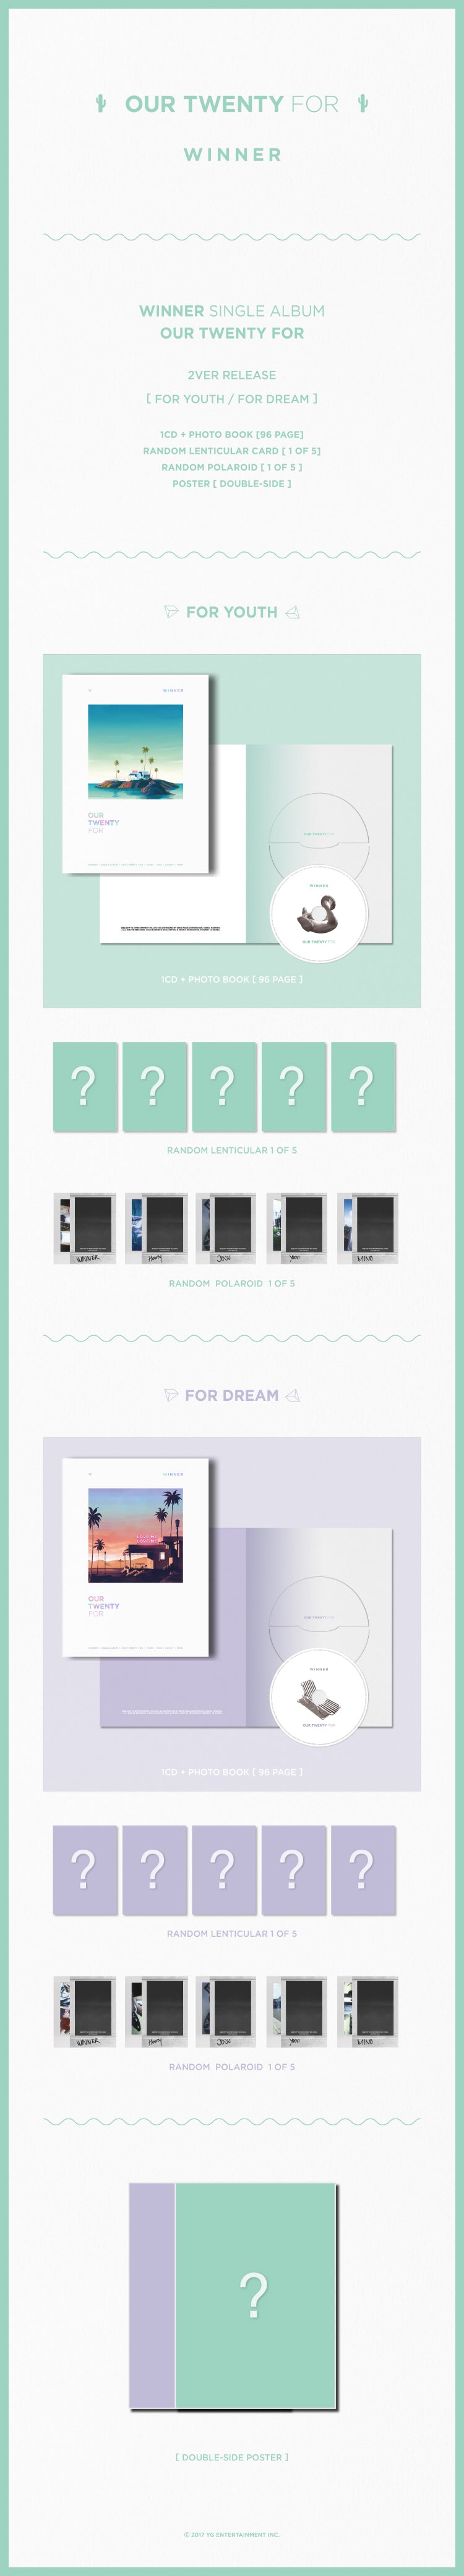 1 CD
1 Booklet (96 pages)
1 Lenticular Card
1 Polaroid Photo